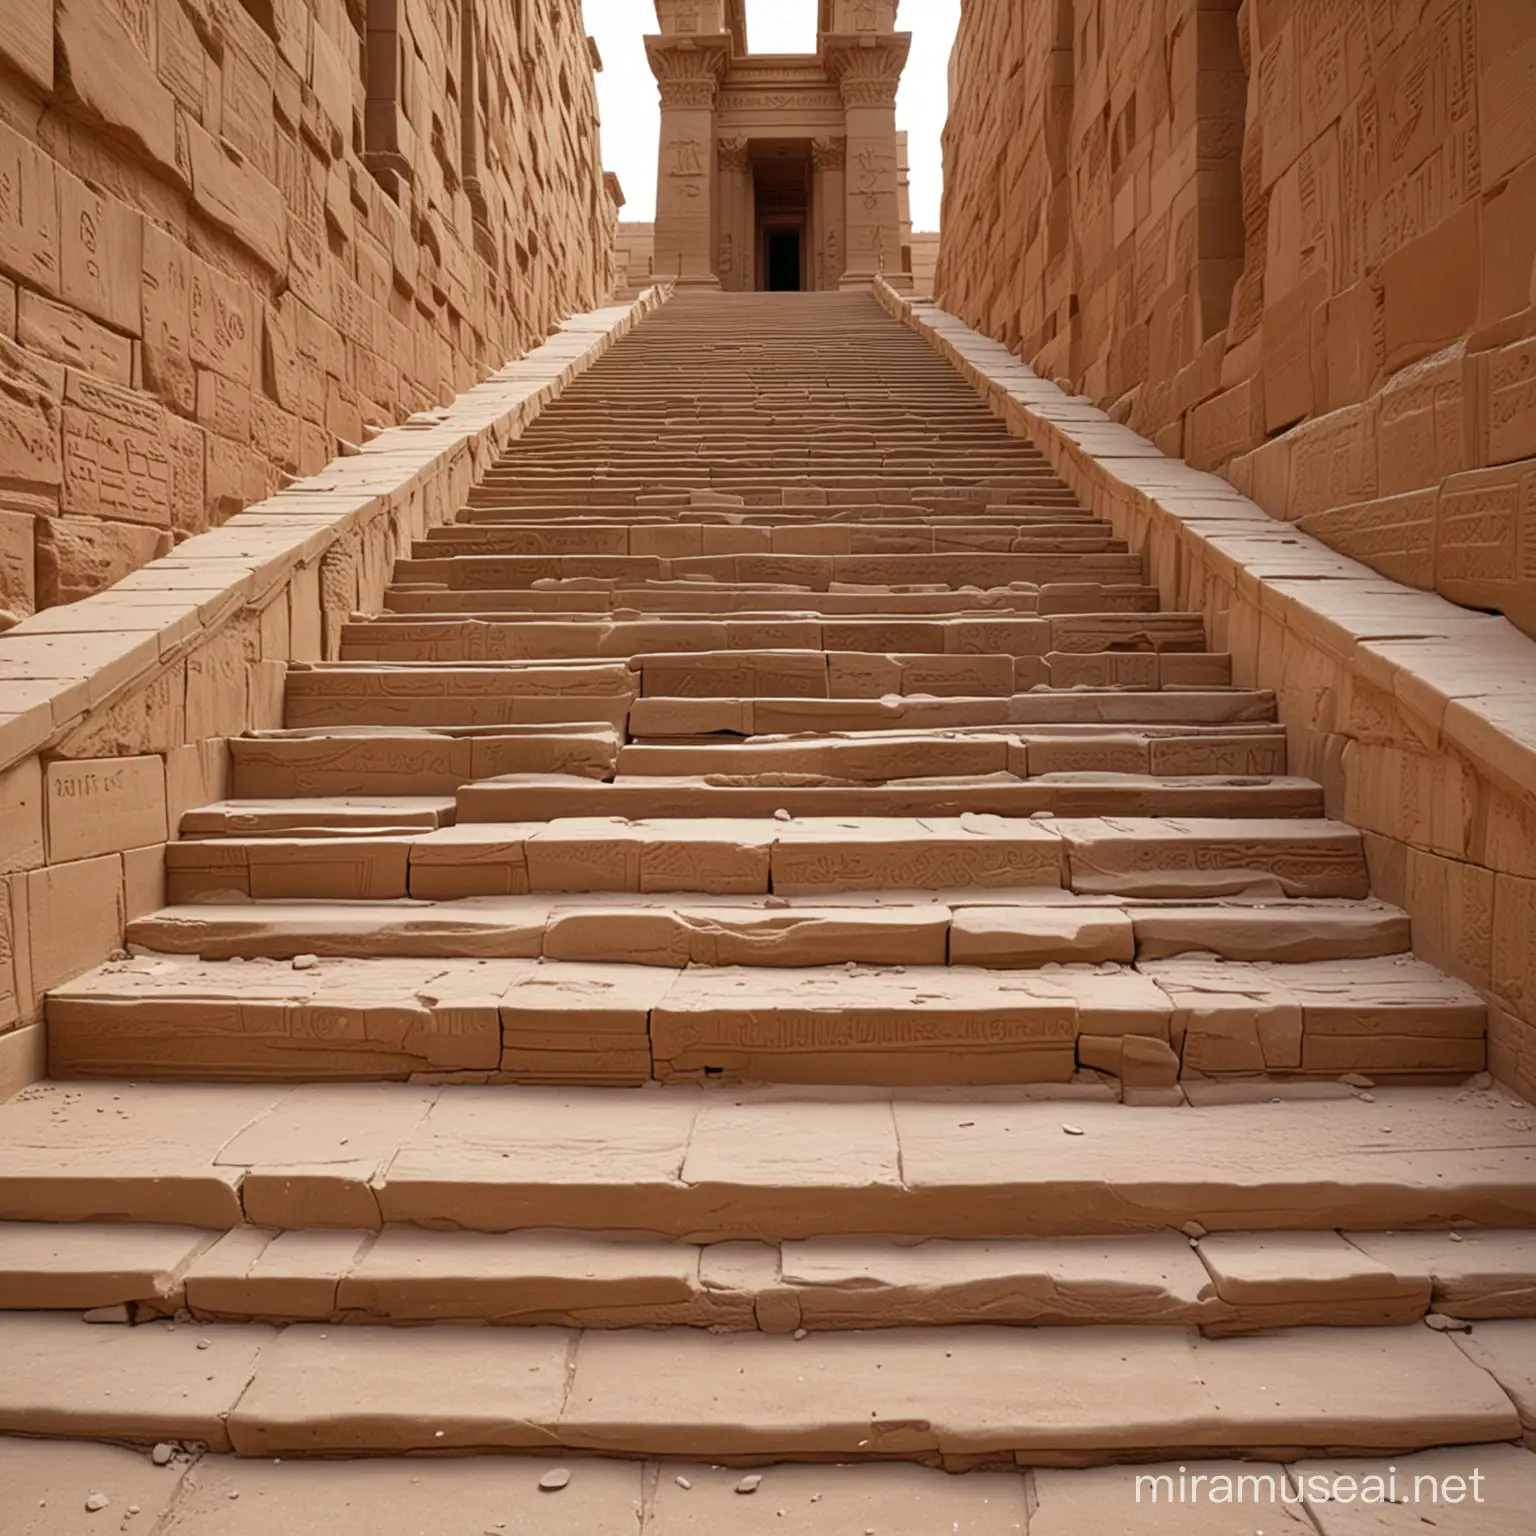 8k, high detailed photo of grand Egyptian sandstone steps, leading up to the goddess palace